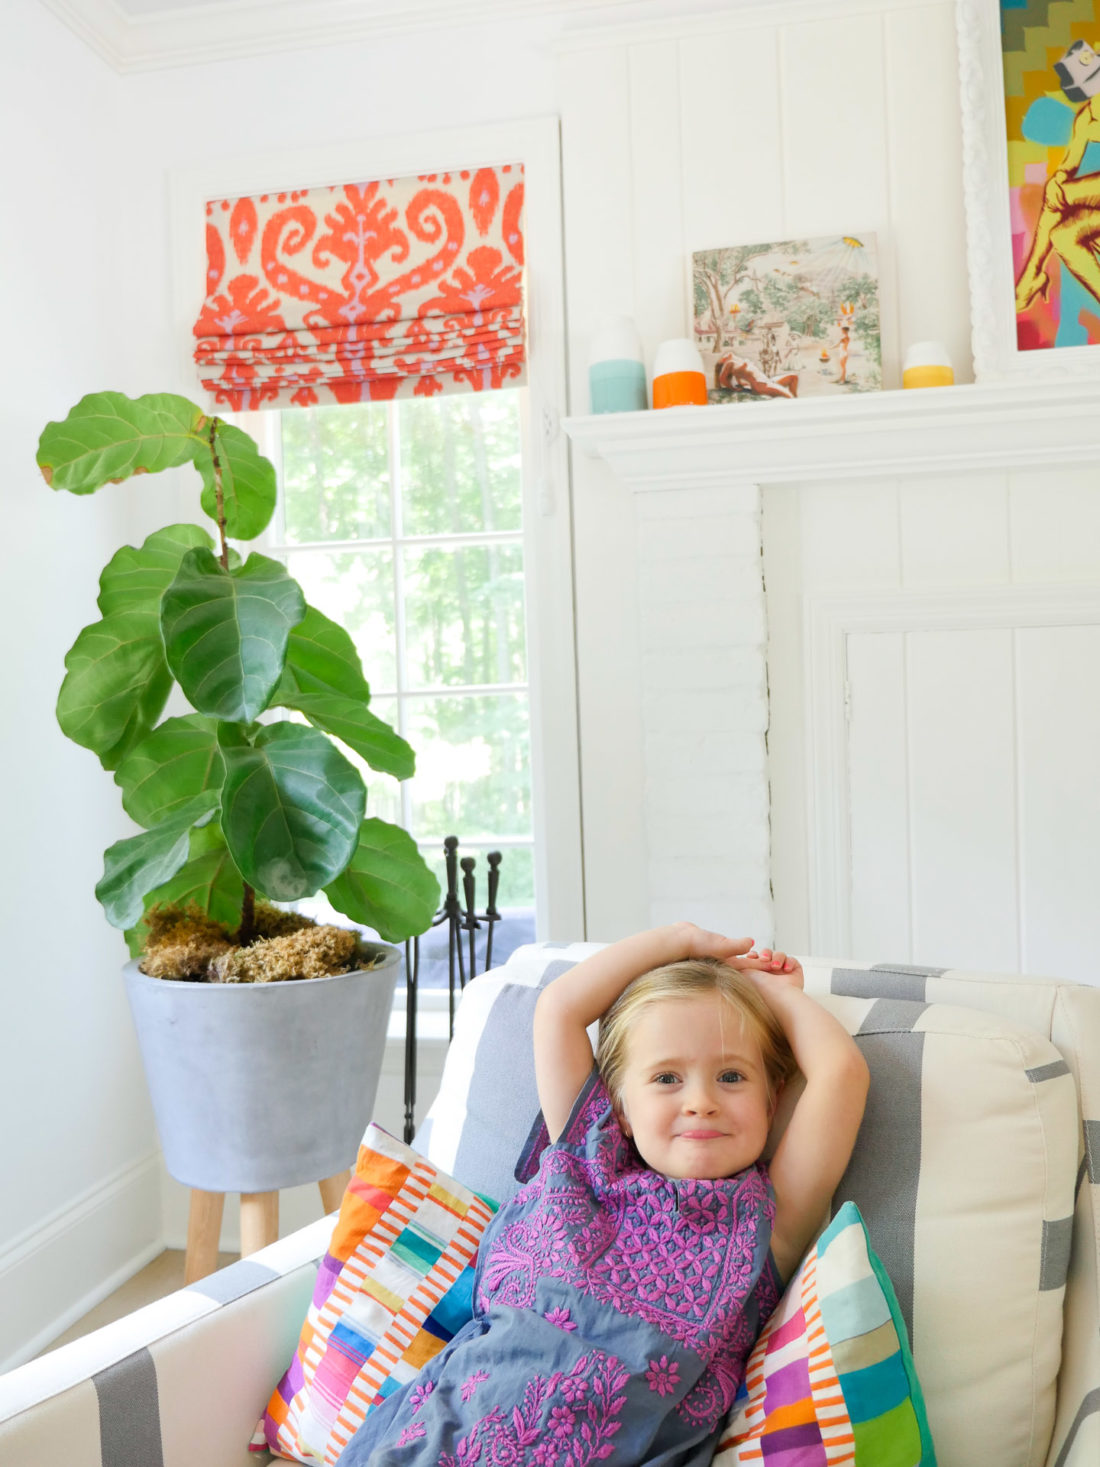 Marlowe Martino wears an embroidered dress and sits in a striped armchair in the family room of her Connecticut home